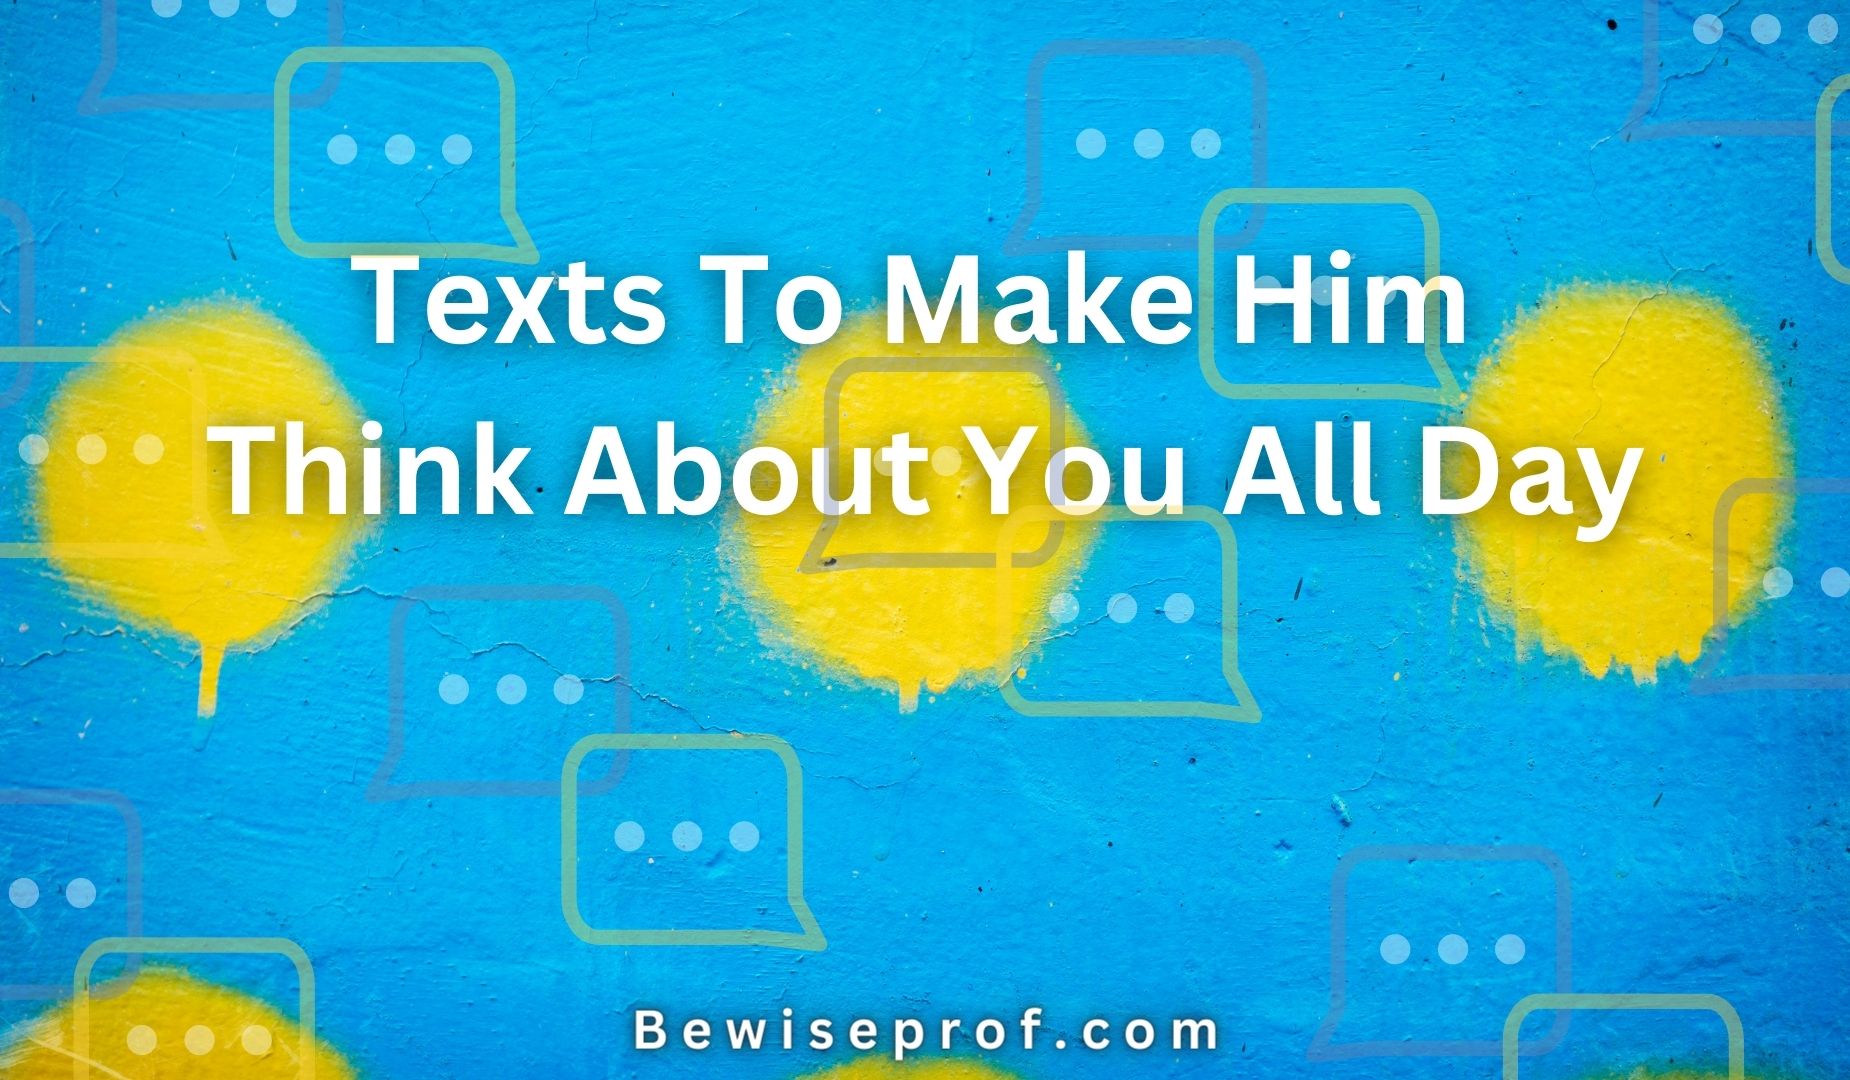 Texts To Make Him Think About You All Day